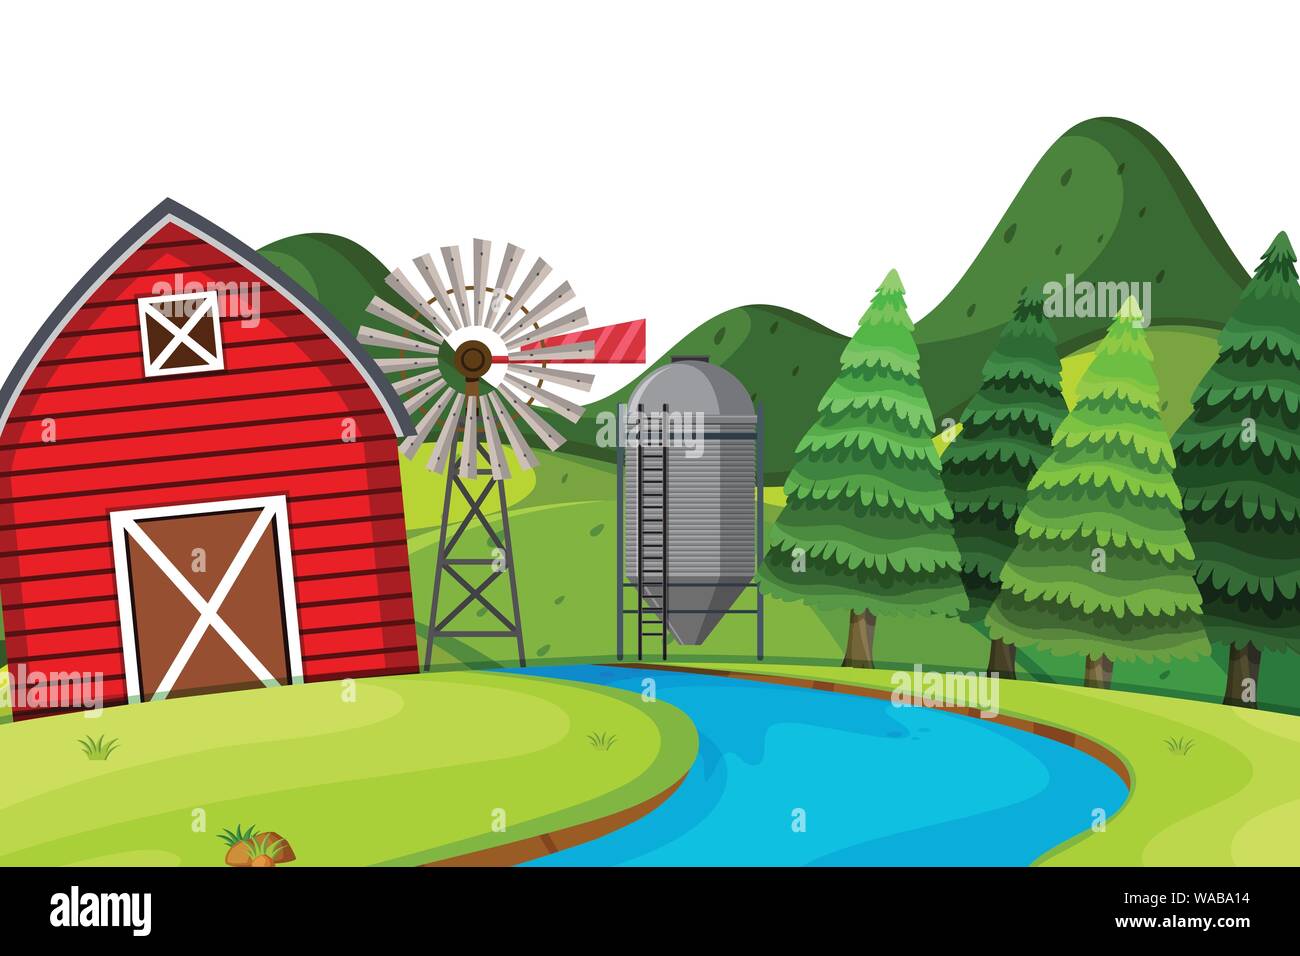 Scenery background of farmland with red barn illustration Stock Vector